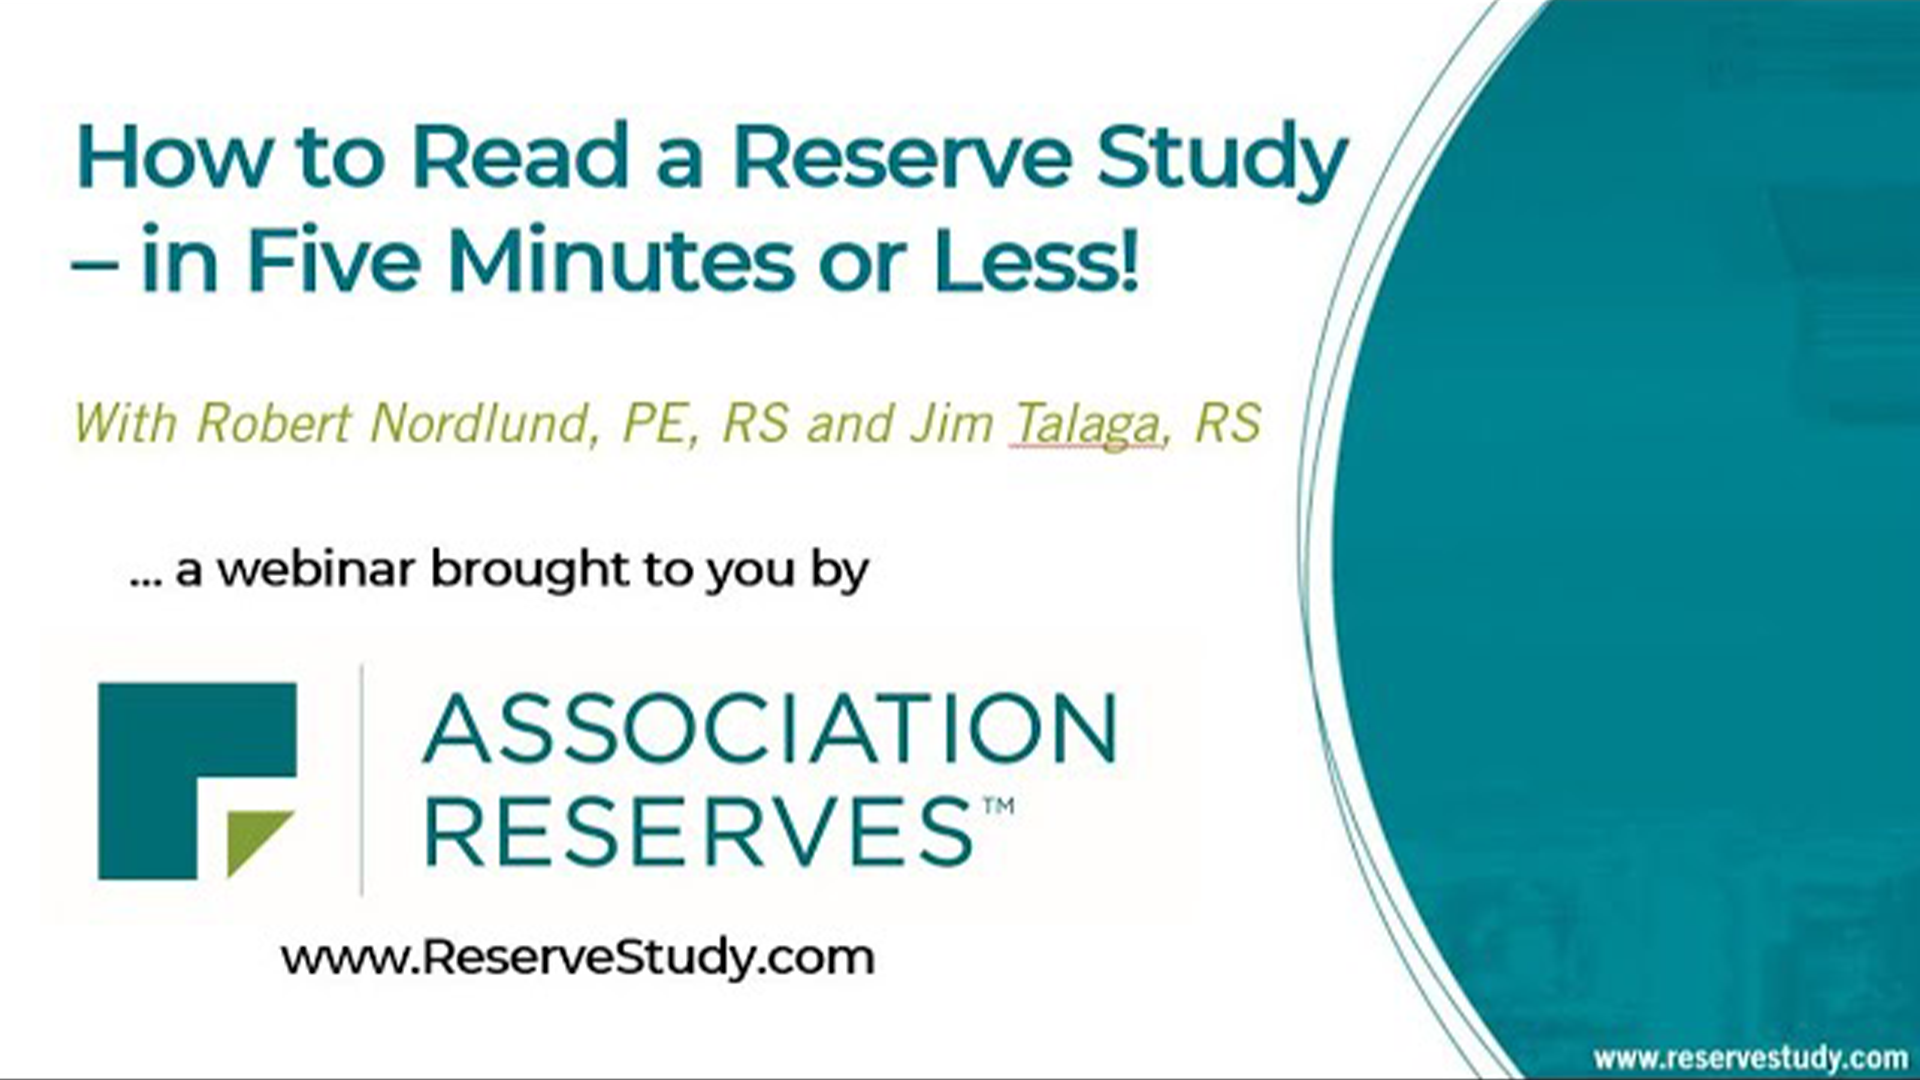 how-to-read-any-hoa-reserve-study-in-5-minutes-webinar-association-reserves